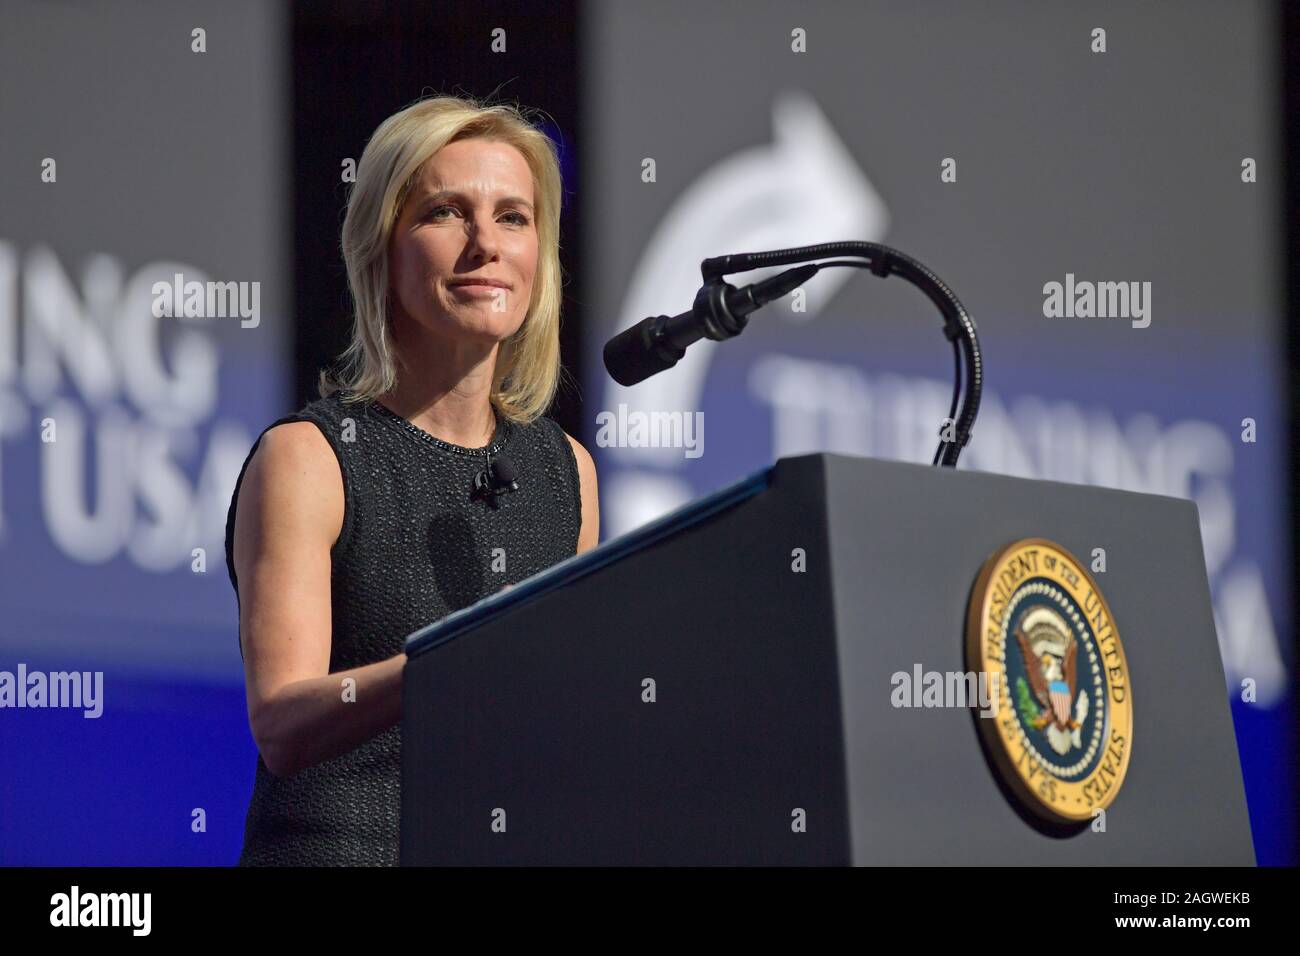 Florida, USA. 21 December 2019. Laura Ingraham speaks at the 2019 Turning Point USA Student Action Summit - Day 3 at the Palm Beach County Convention Center on December 20, 2019 in West Palm Beach, Florida.   People:  Laura Ingraham Stock Photo